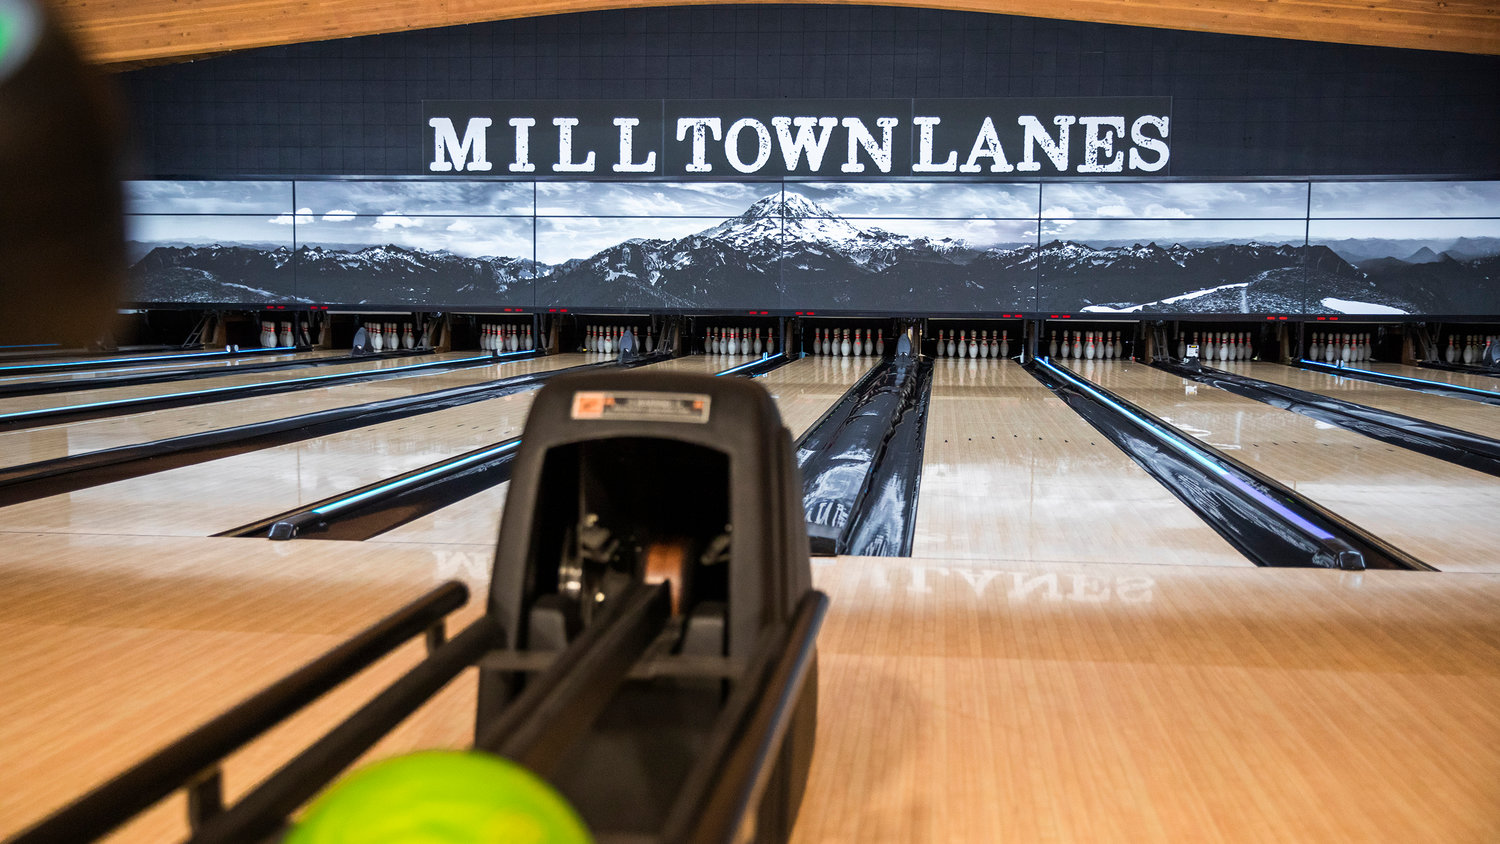 Pins are set for bowling at the Mill Town Lanes in Morton.